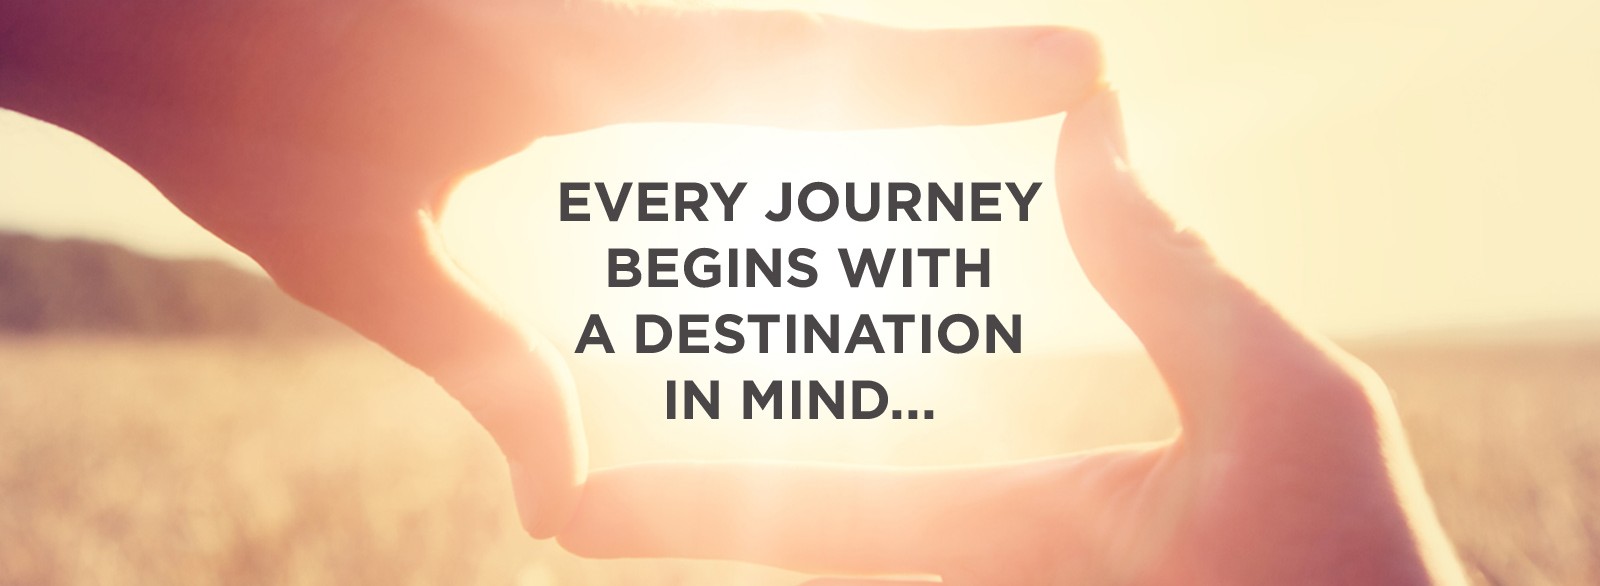 Every Journey Begins with a Destination in Mind...